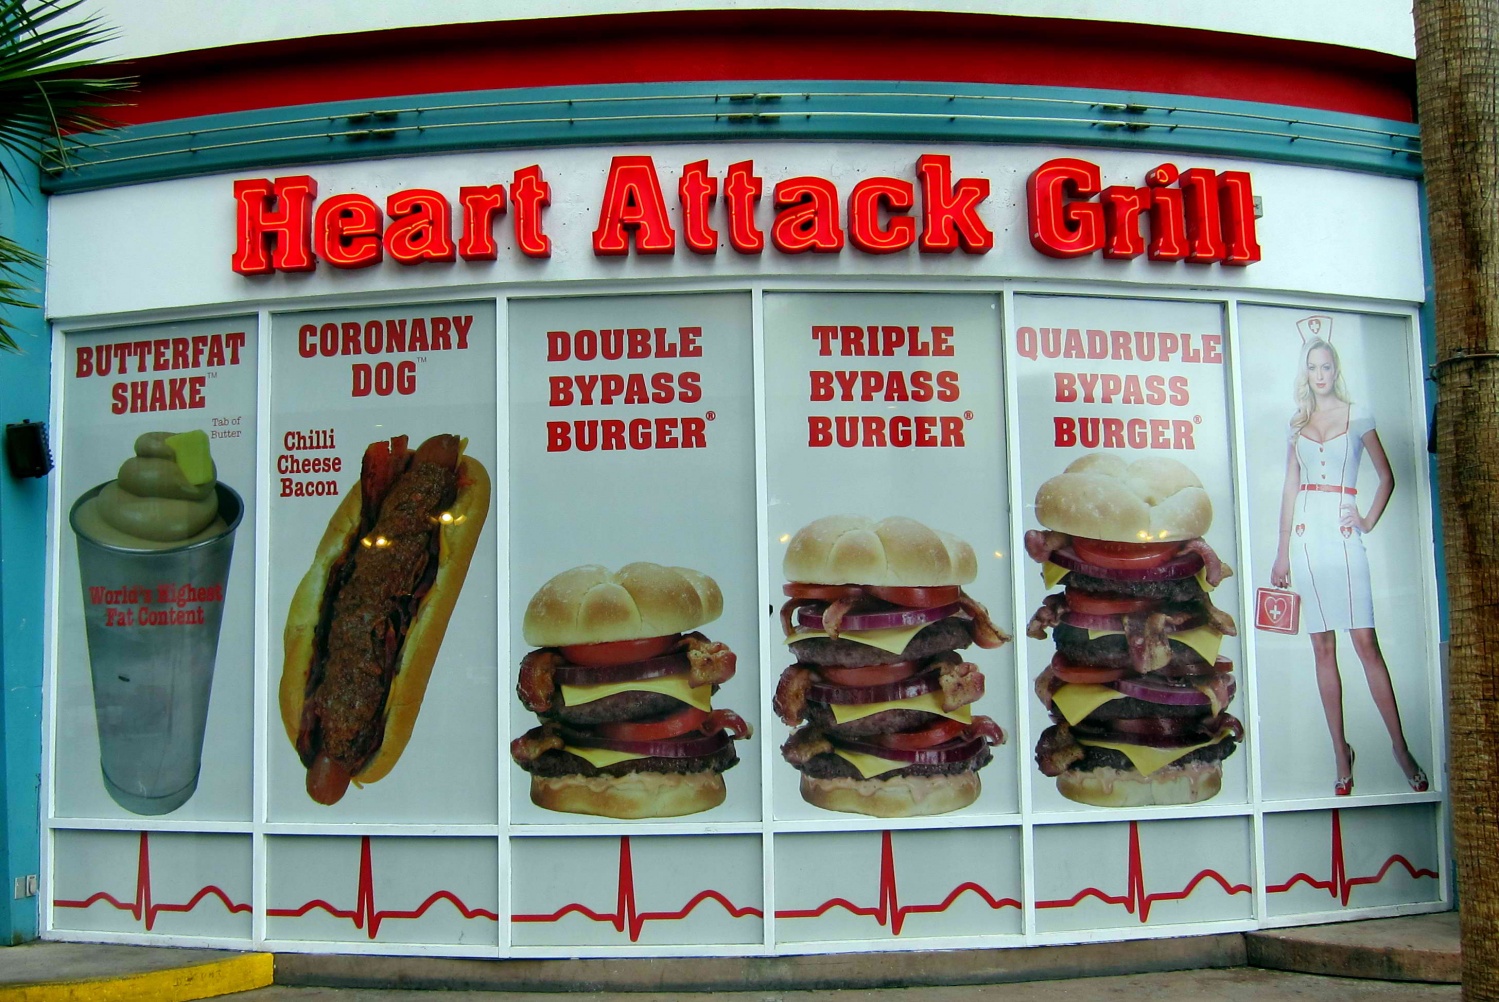 Attack Grill Displays Cremated of Past Customer as New Marketing Tool | Science Times